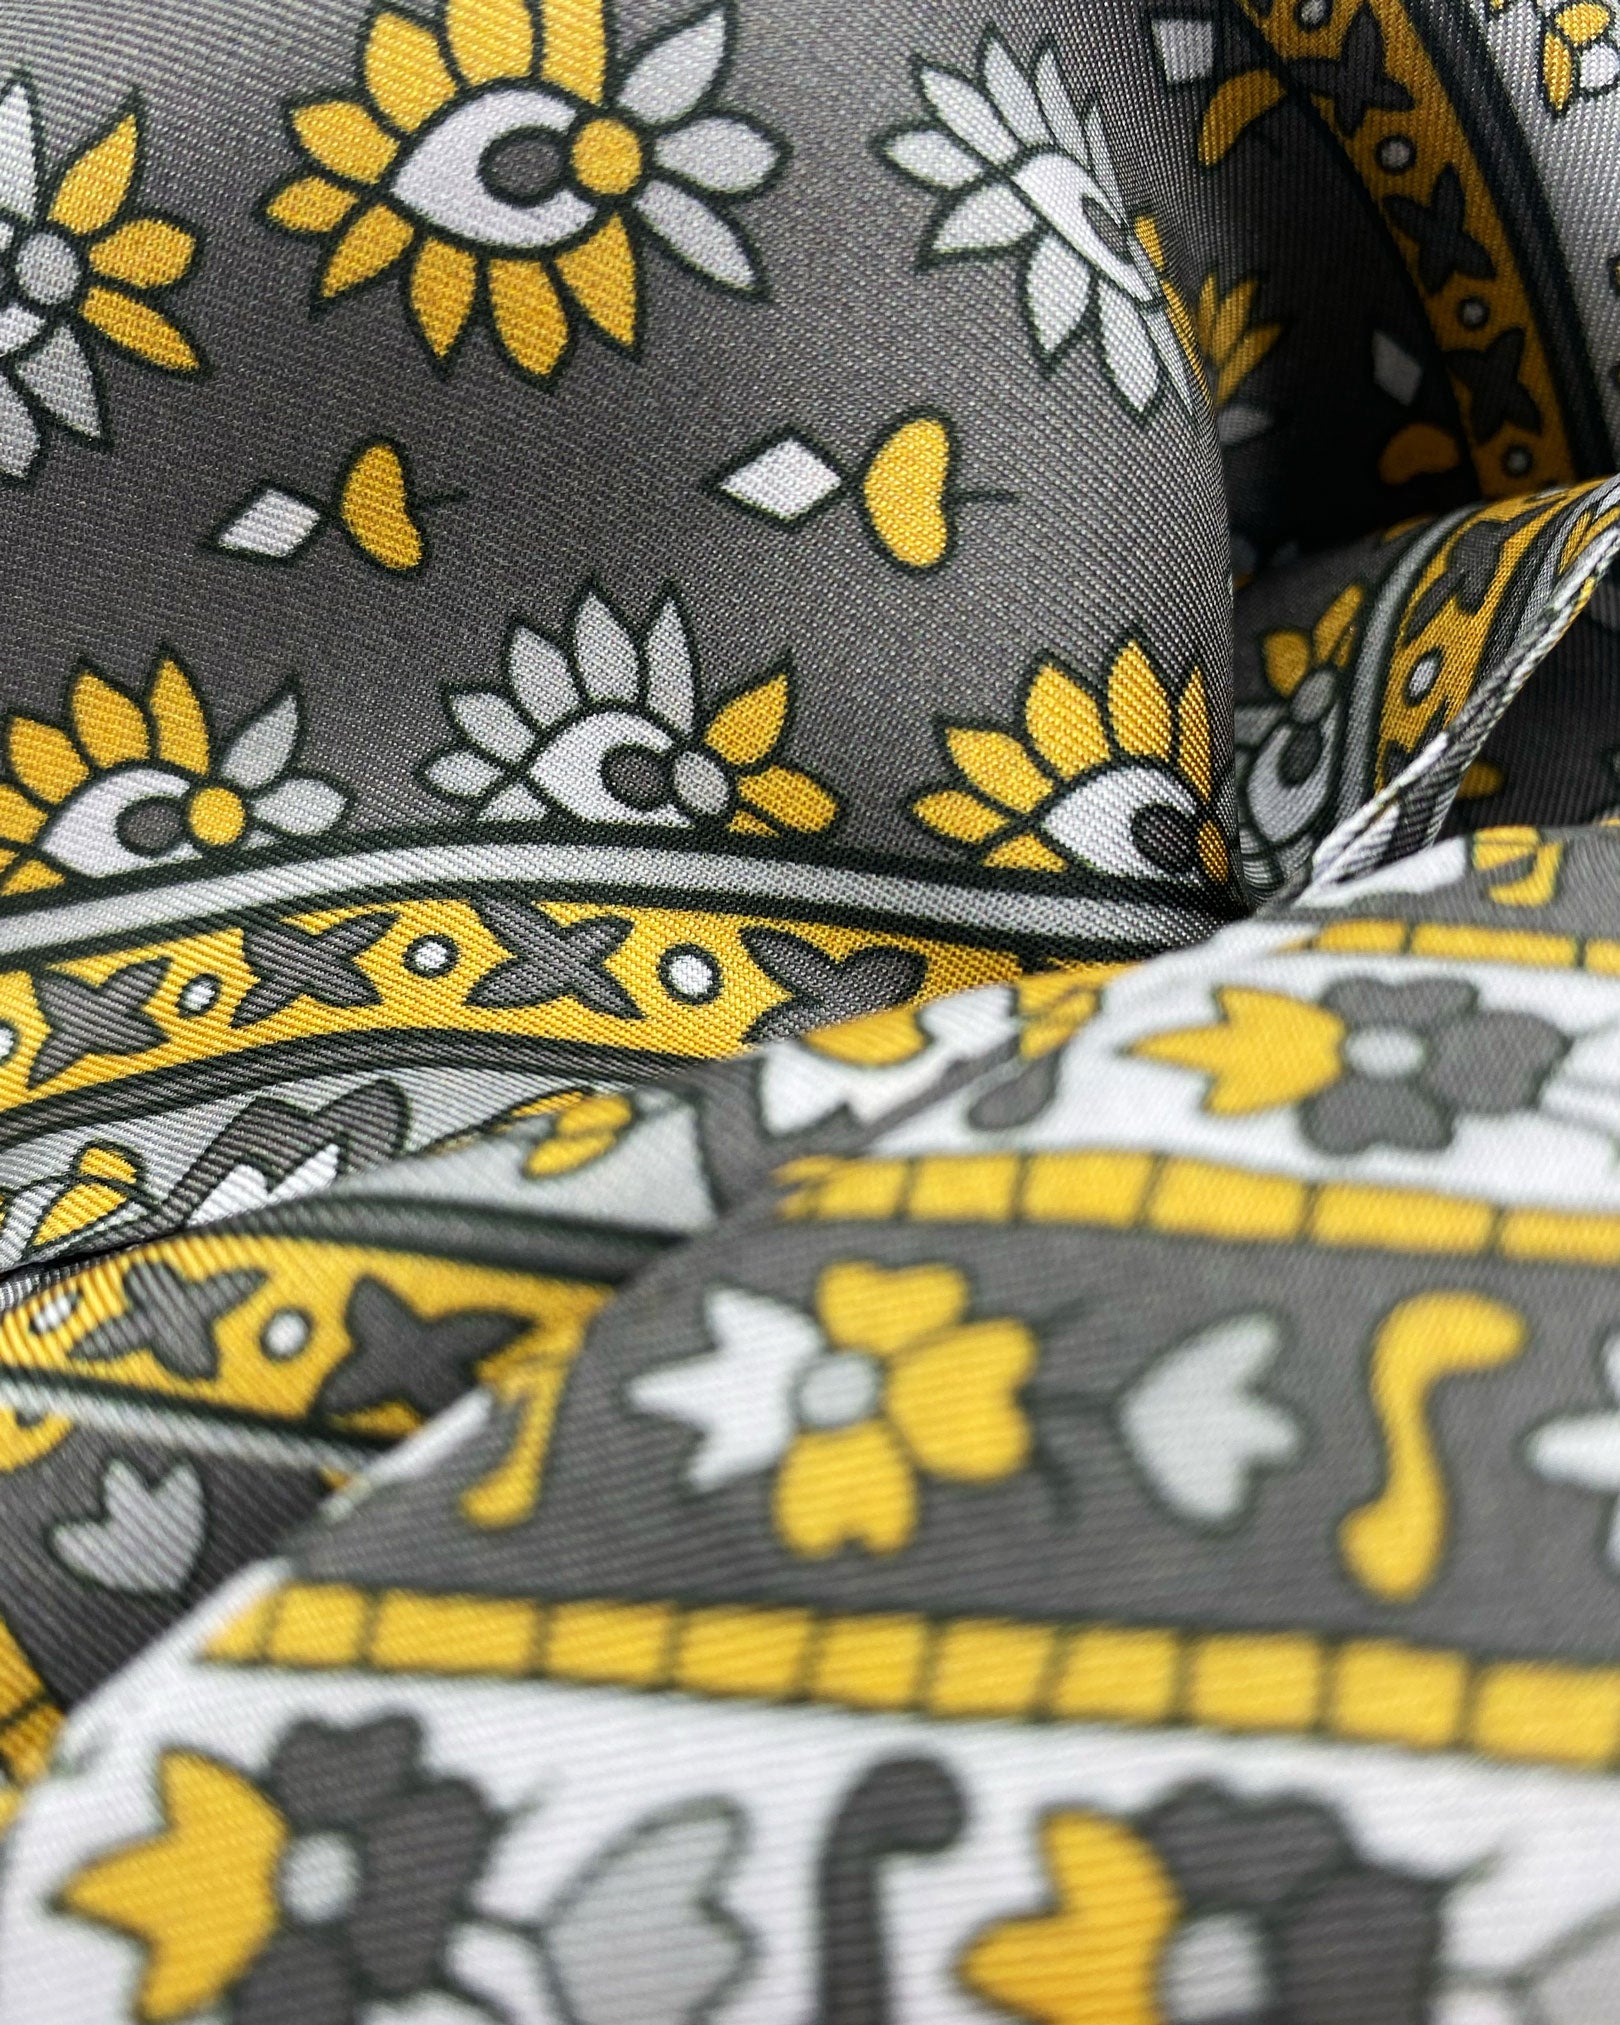 Ruffled close-up view of the Whitehorse polyester scarf, presenting a closer view of the floral and geometric circular and diamond patterns with silver, grey and muted yellow palette.